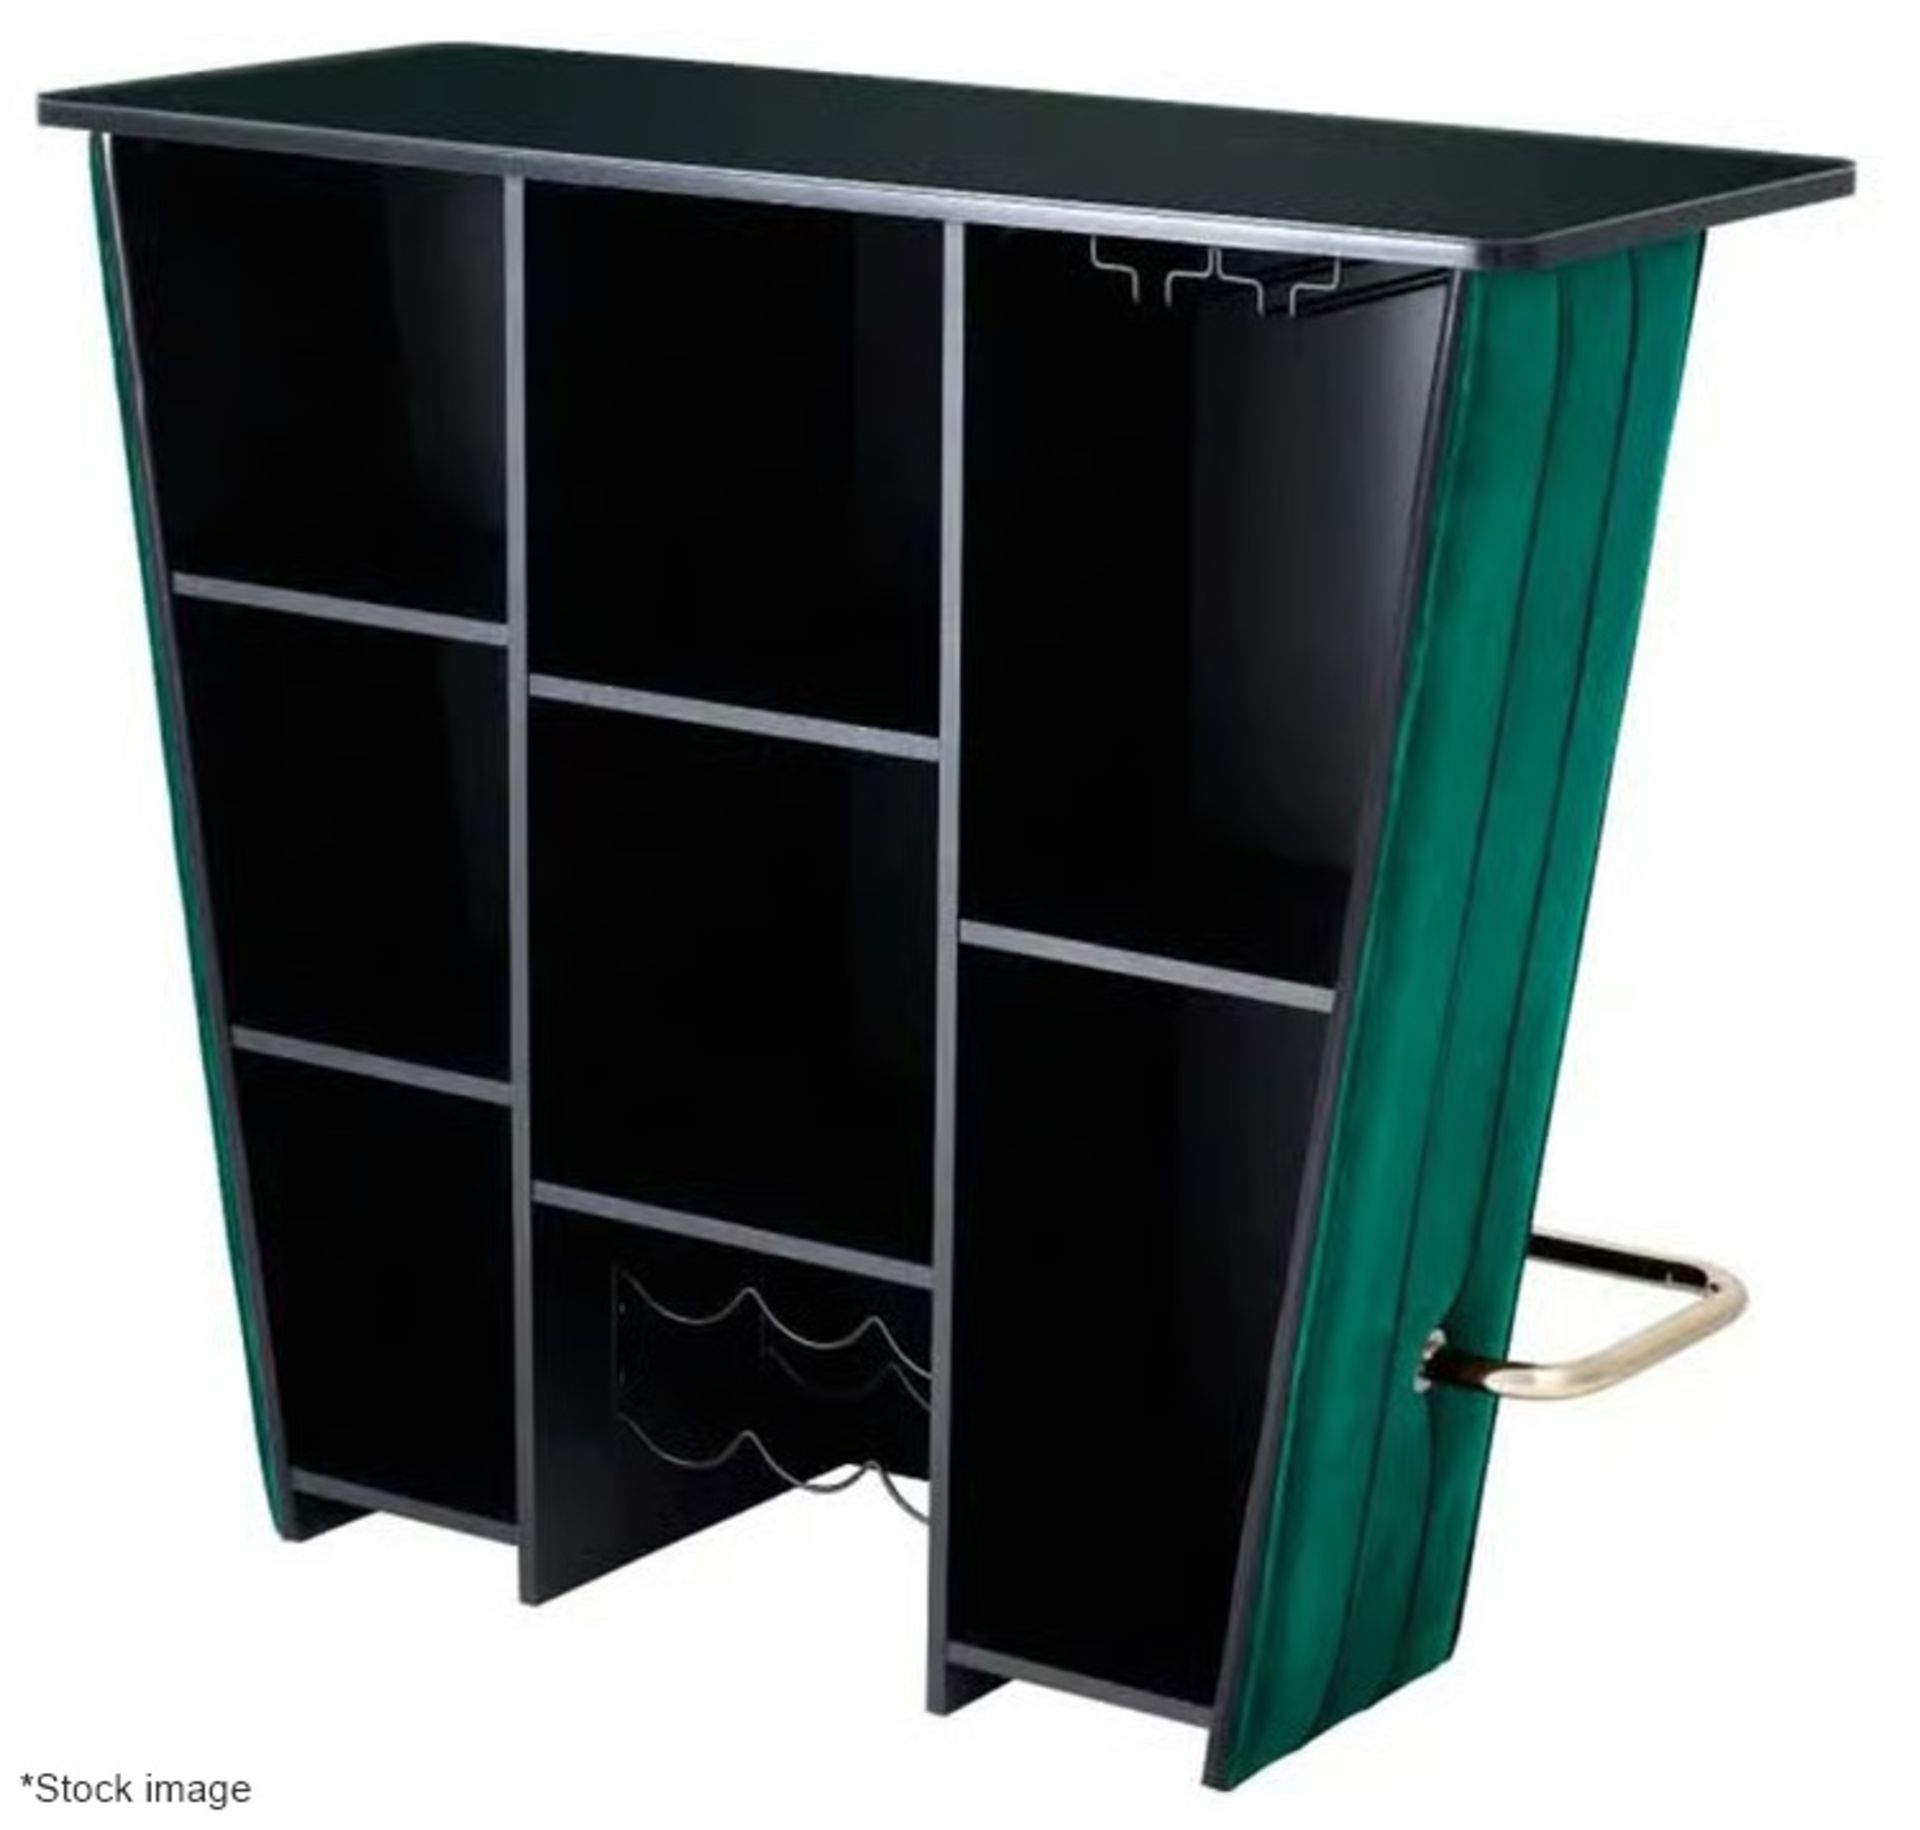 1 x EICHHOLTZ Bolton Bar Counter With A Green Velvet Frontage And Brass Foot Rail - RRP £1,980 - Image 9 of 11